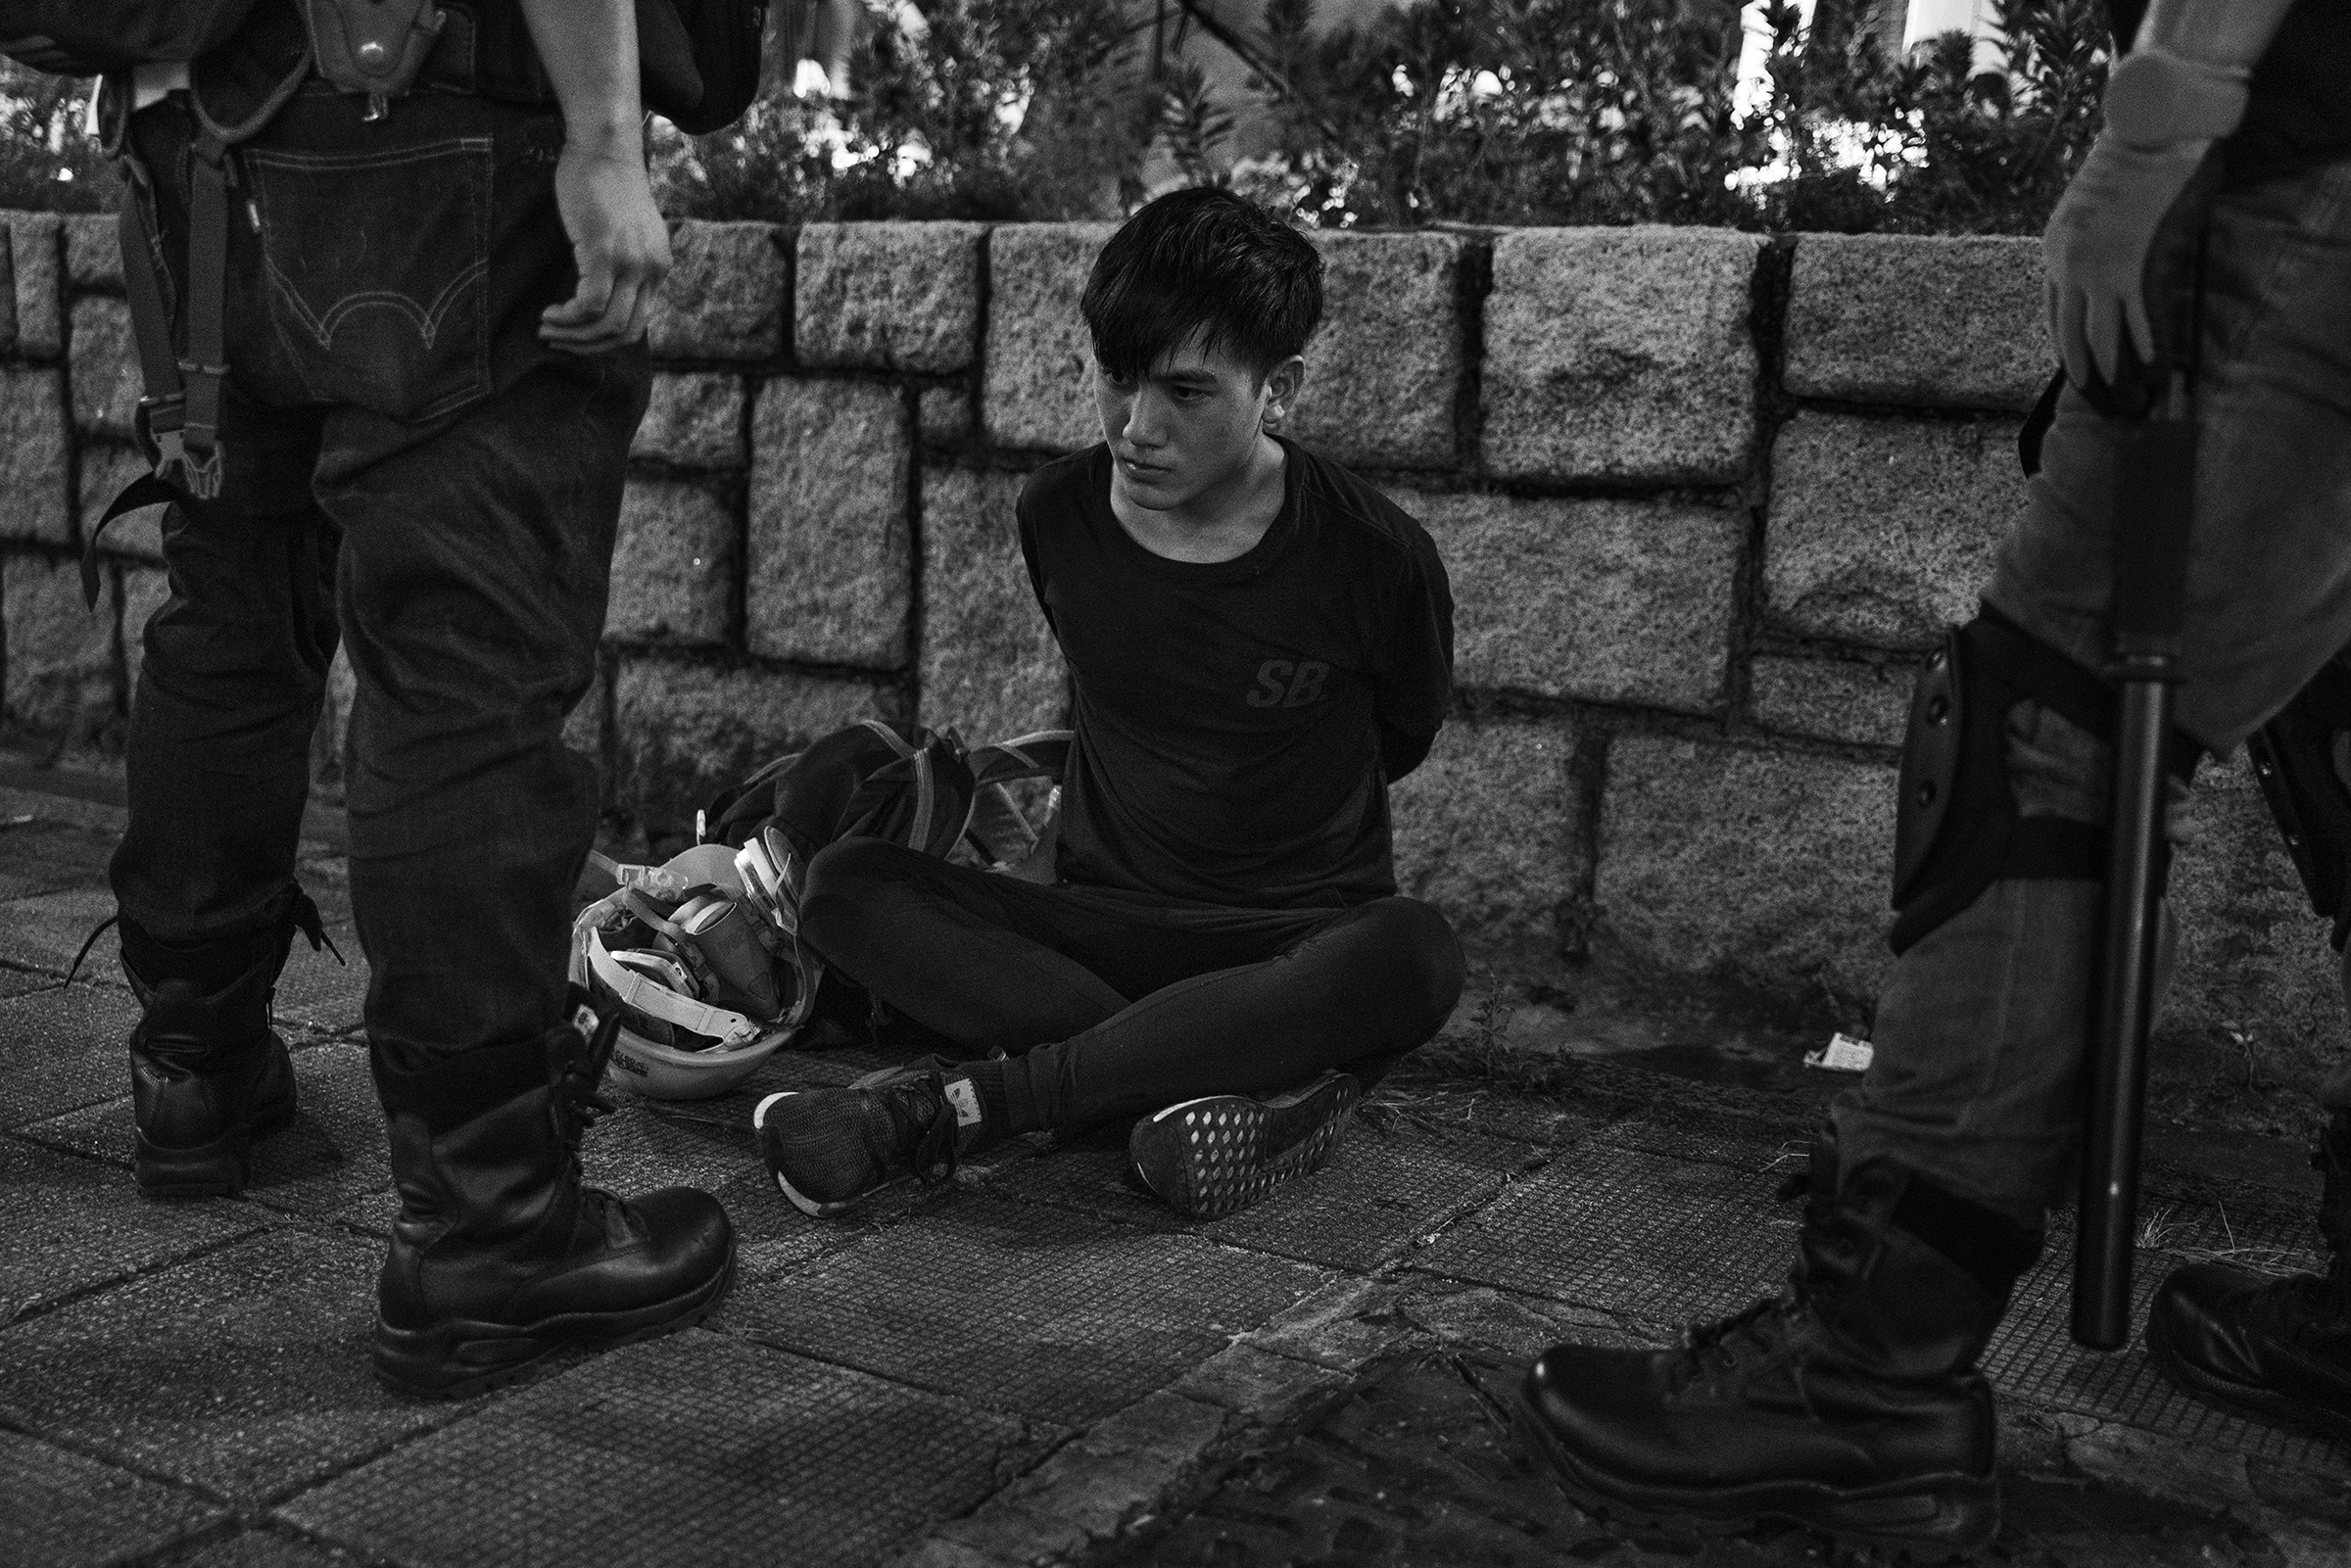 On Aug. 11, an antigovernment protester is arrested near the Tsim Sha Tsui police station in Kowloon, Hong Kong. Aug. 26 issue. (Adam Ferguson for TIME)